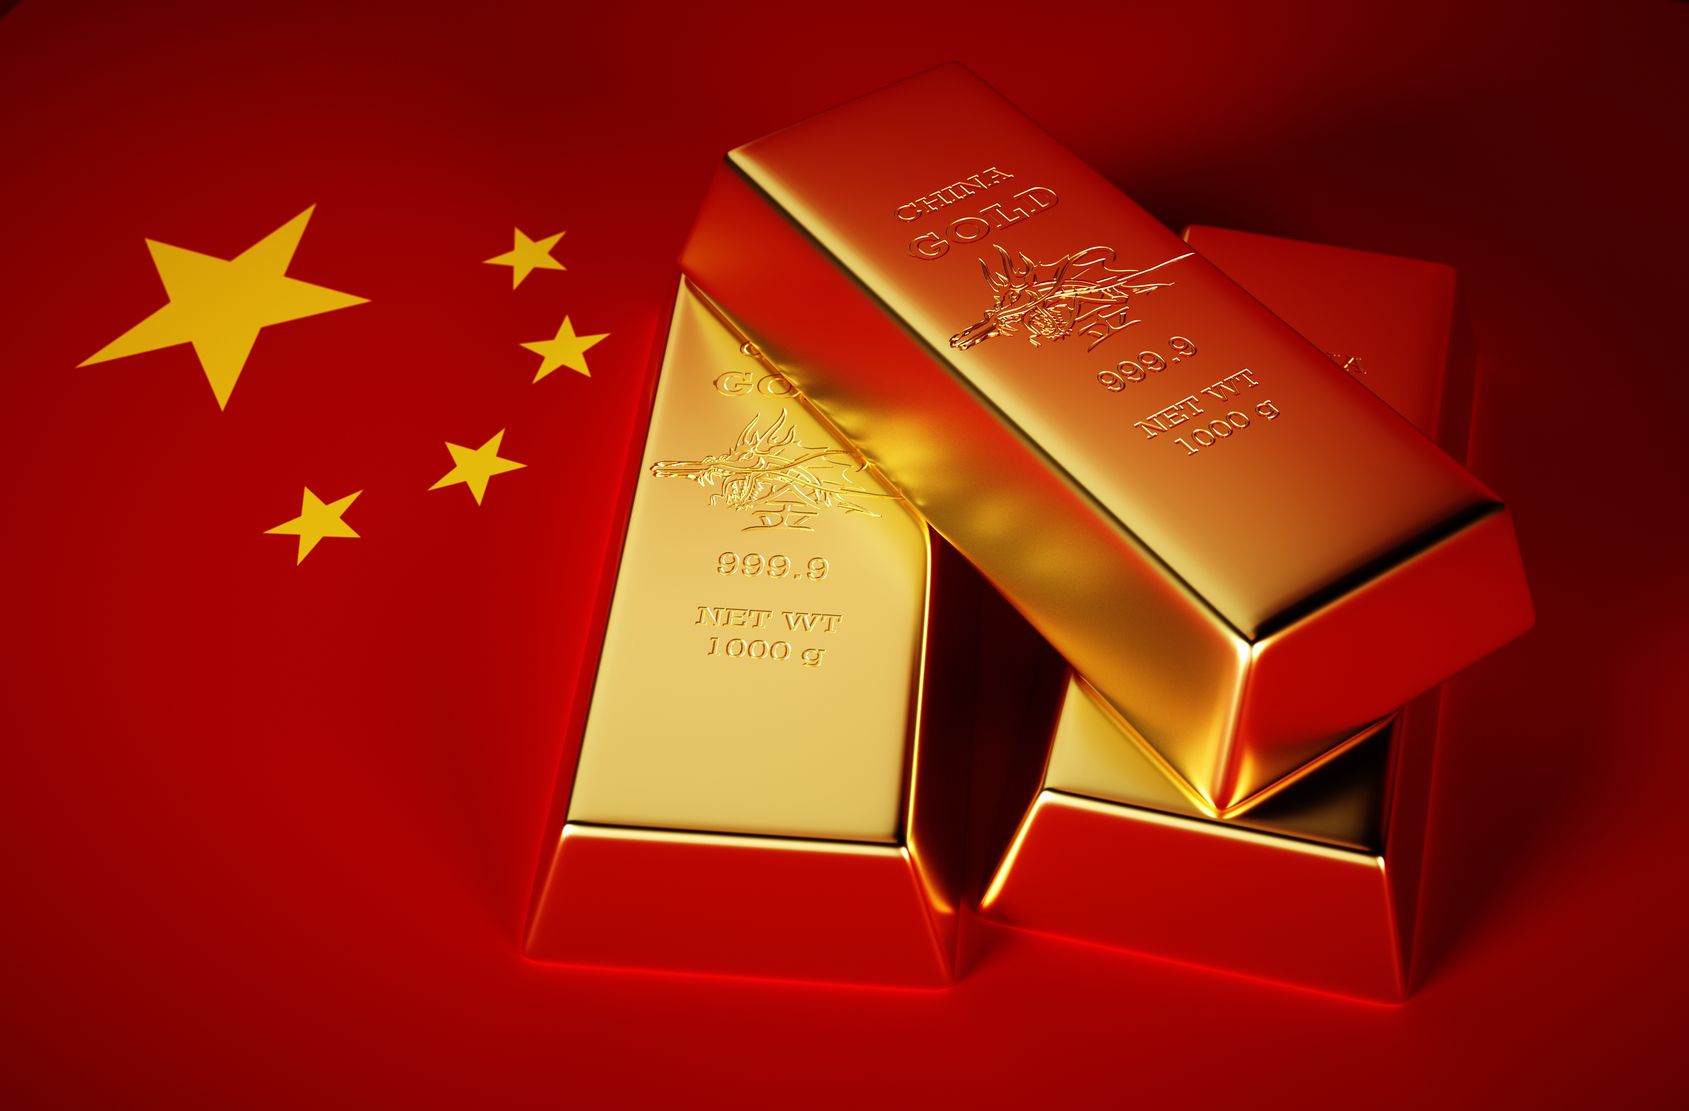 Estimating the True Size of China’s Gold Reserves